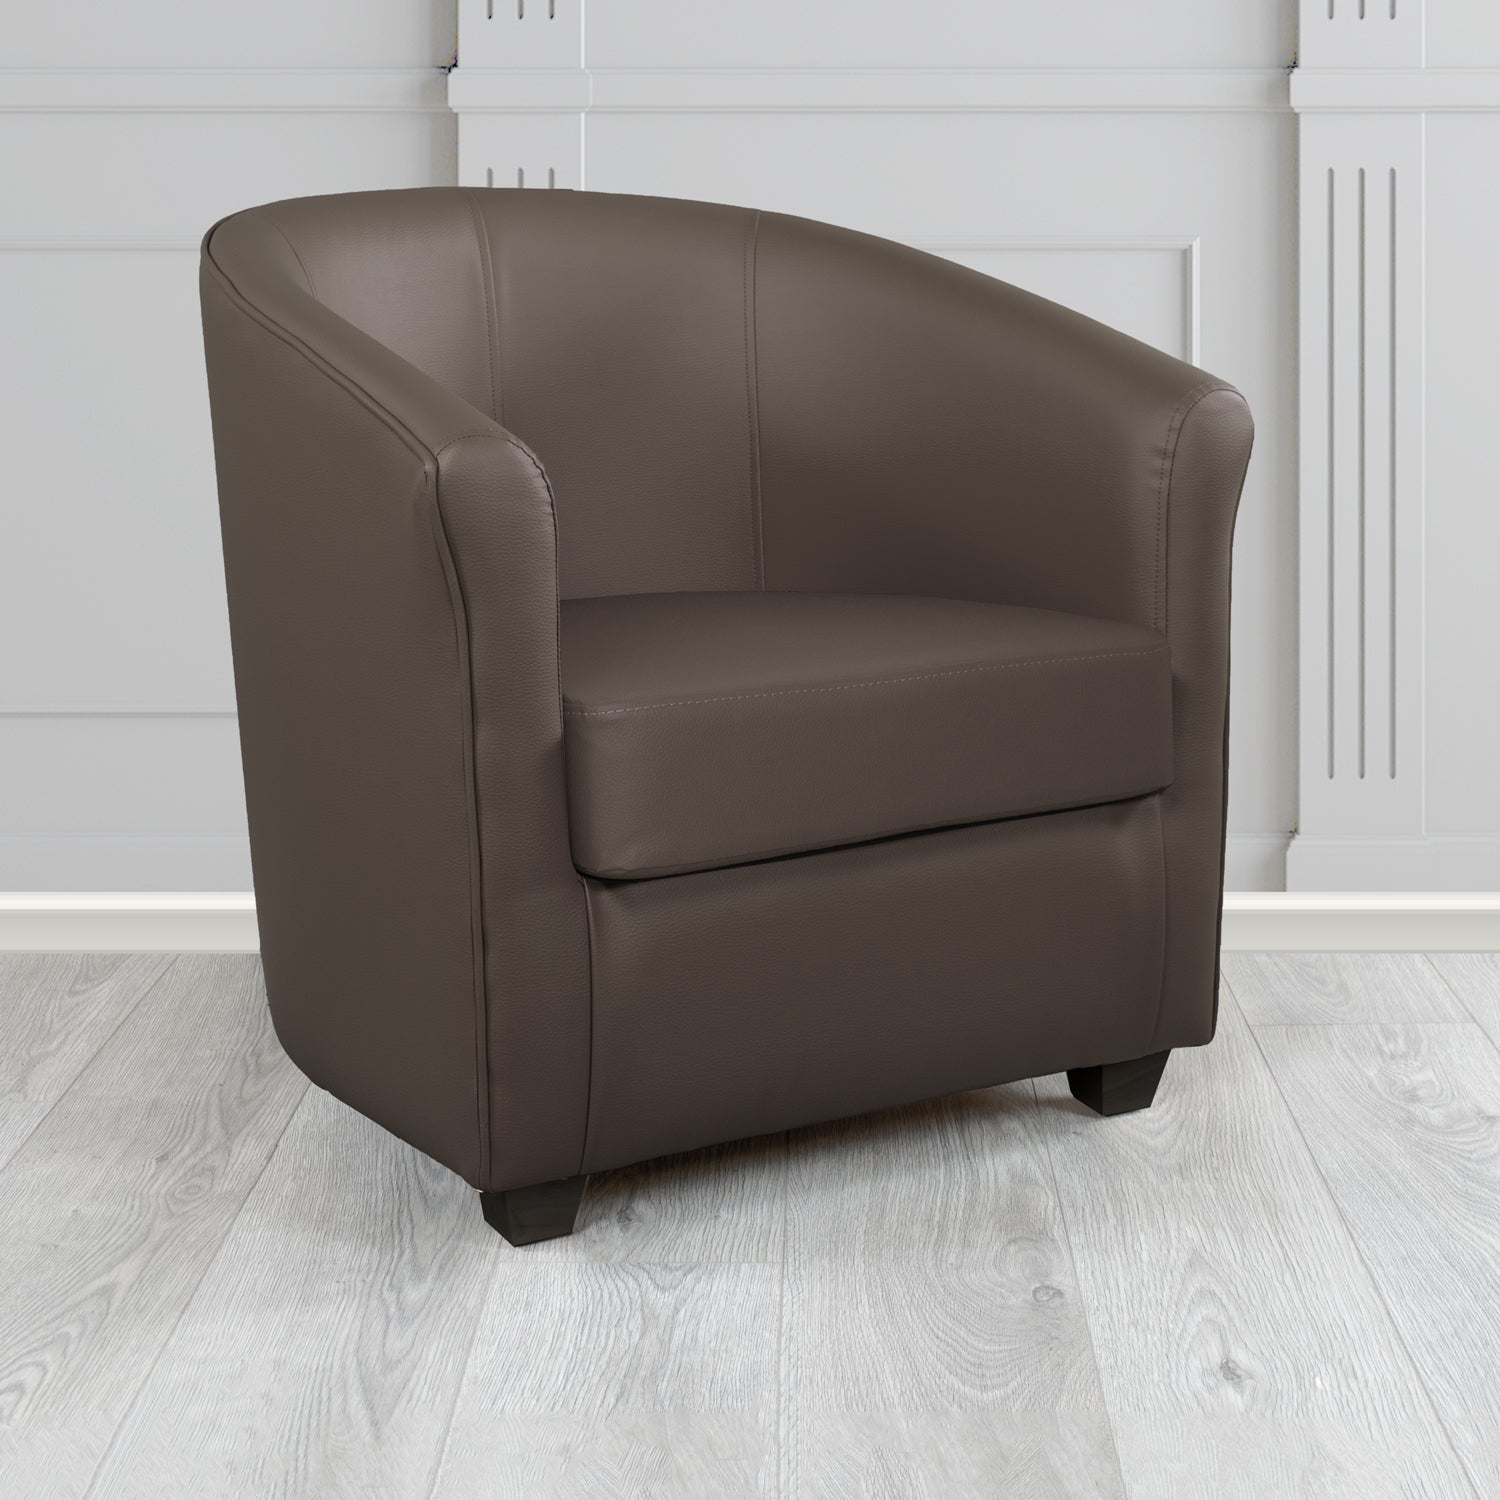 Cannes Tub Chair in Madrid Chocolate Faux Leather - The Tub Chair Shop